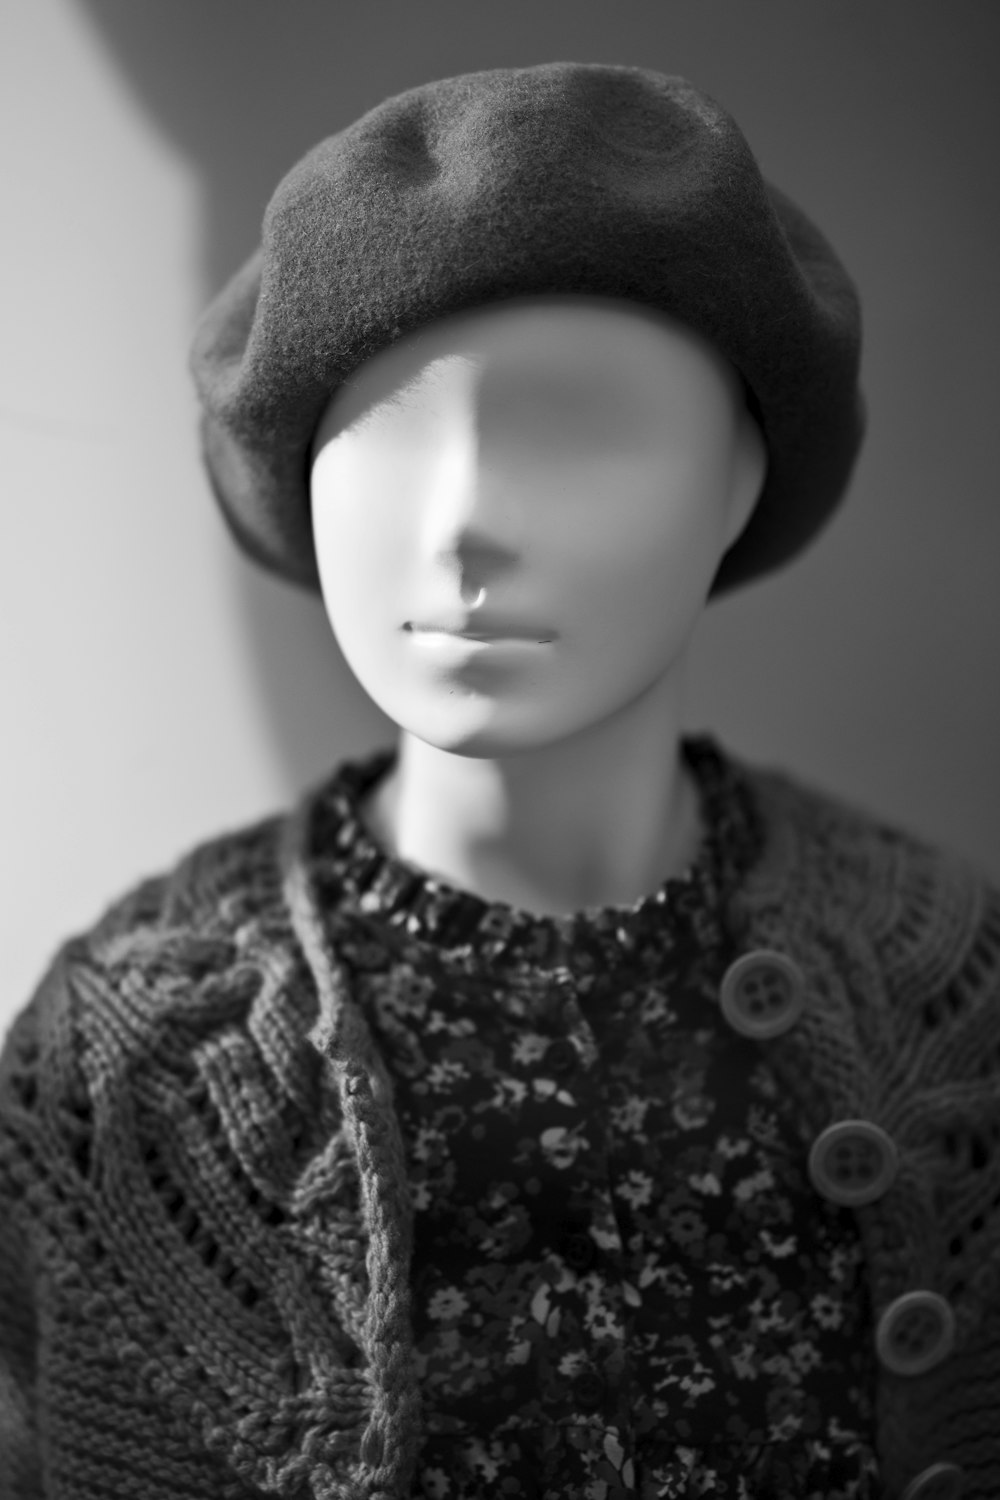 grayscale photo of woman wearing knit cap and knit shirt